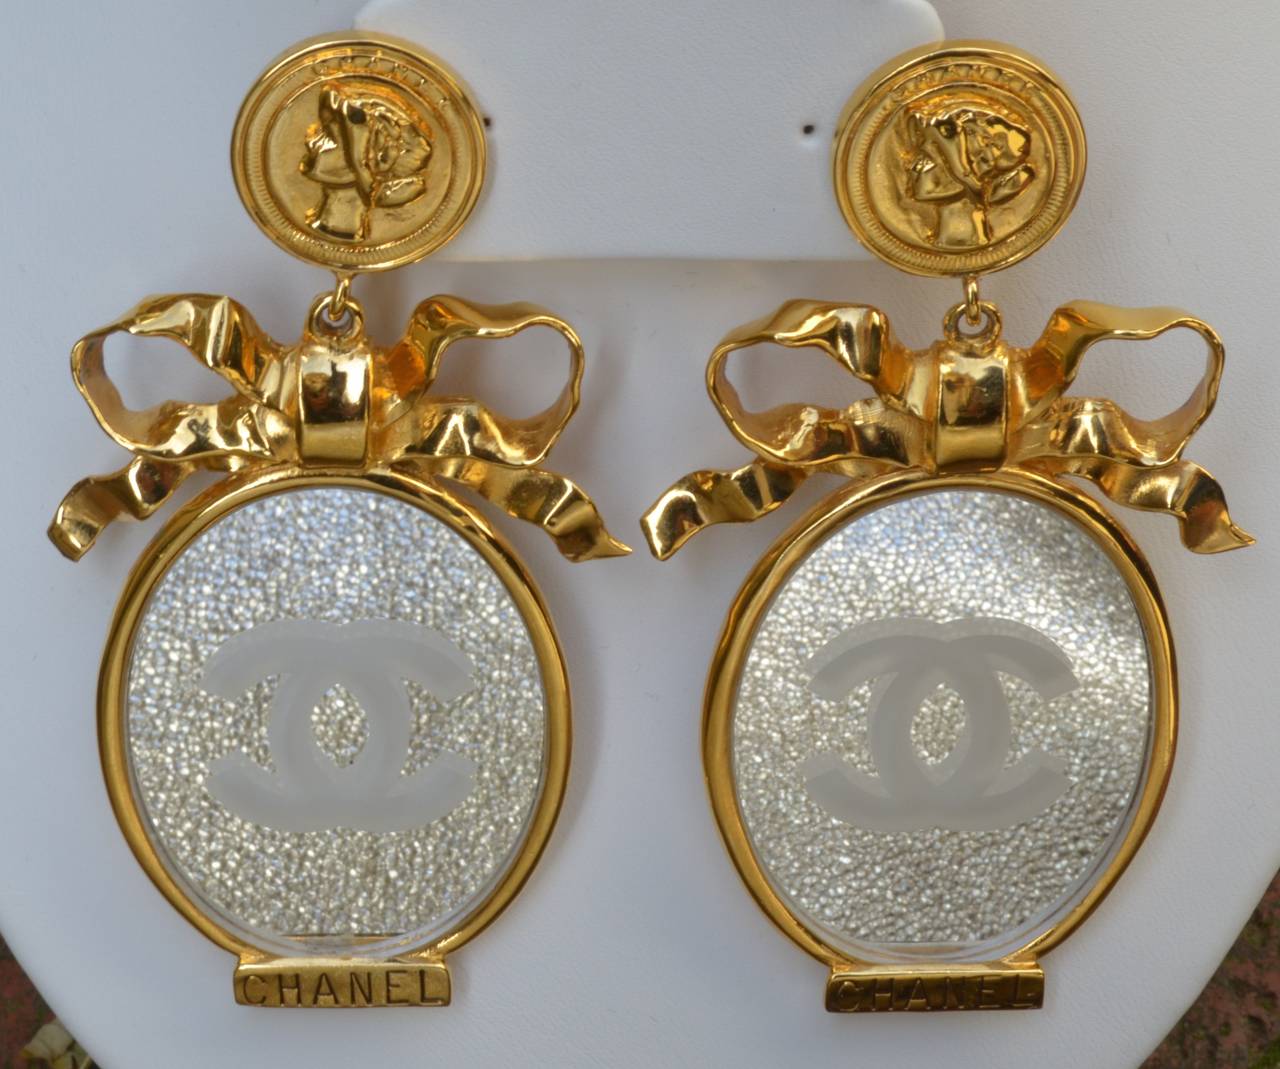 Rare Huge Chanel Couture Huge Etched Mirror Mirror Earrings

These are definitely the 